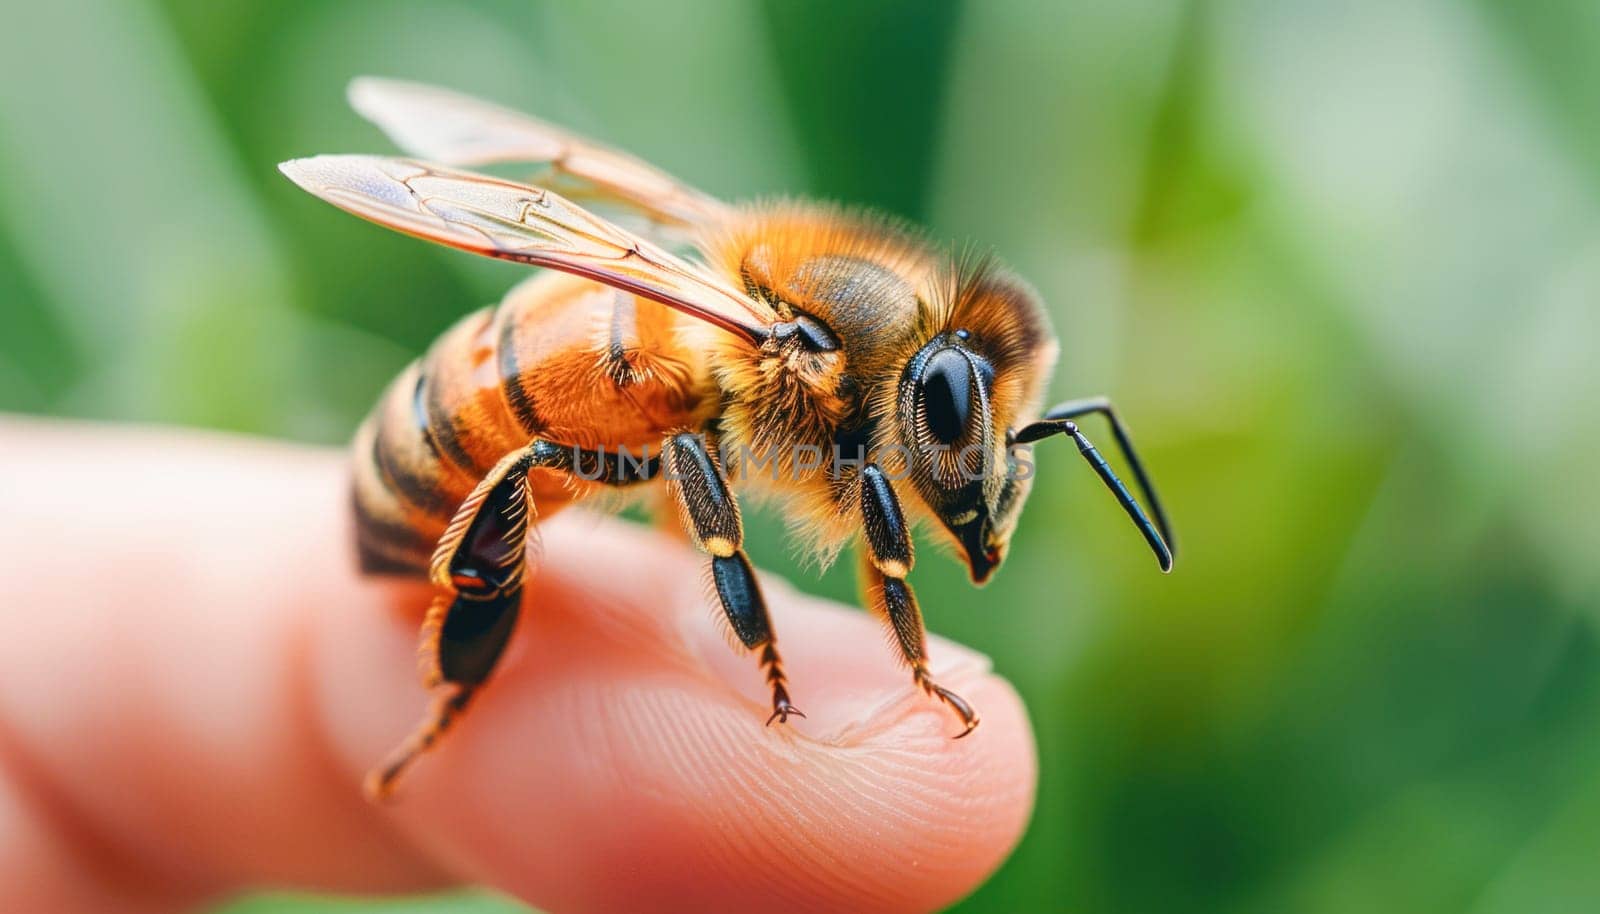 A closeup view of a bee perched on a persons finger, showcasing the intricate details of the insect